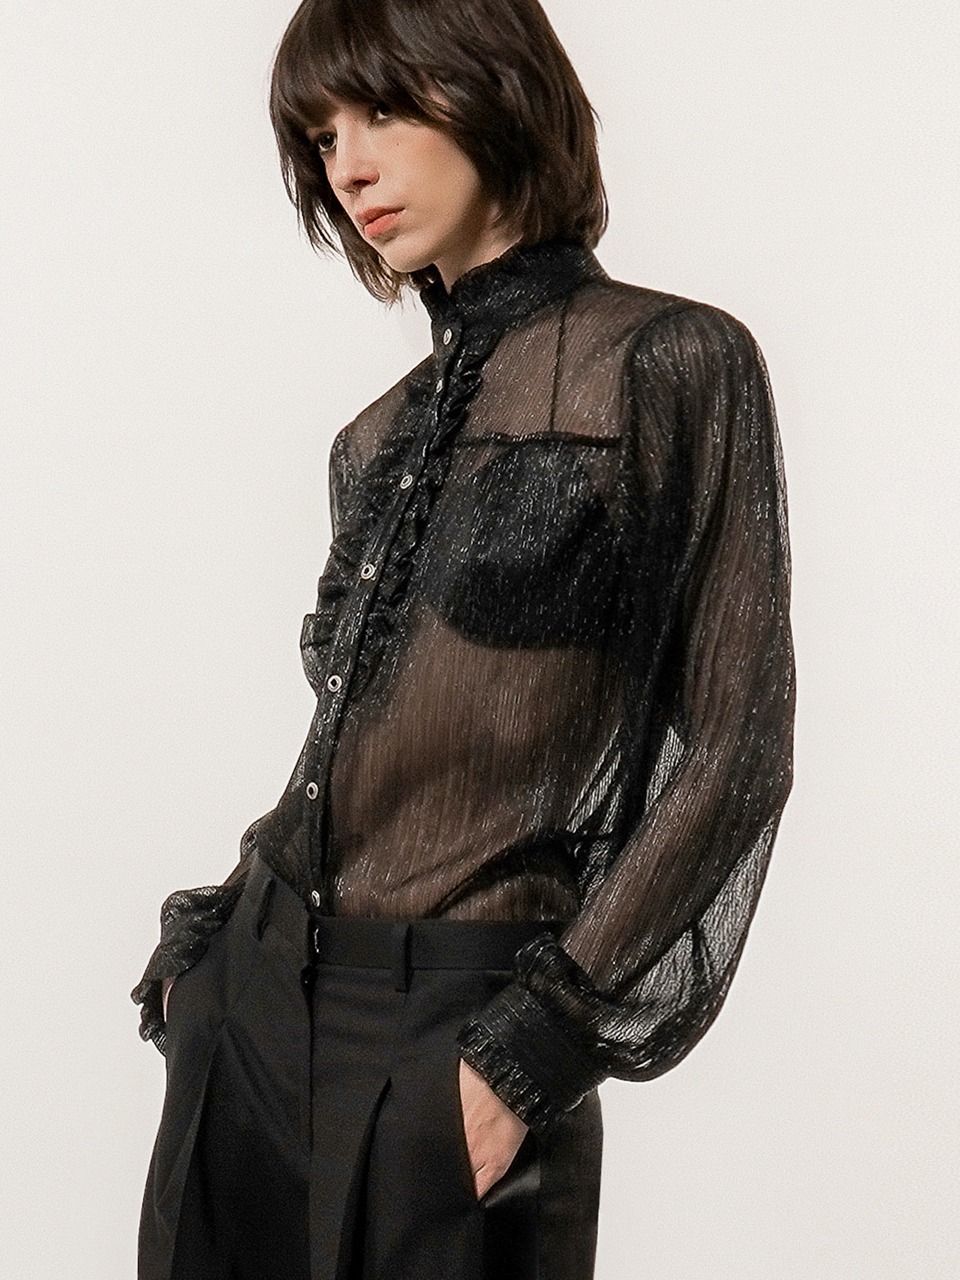 Victorian Ruffled Sheer Blouse for woman (black)